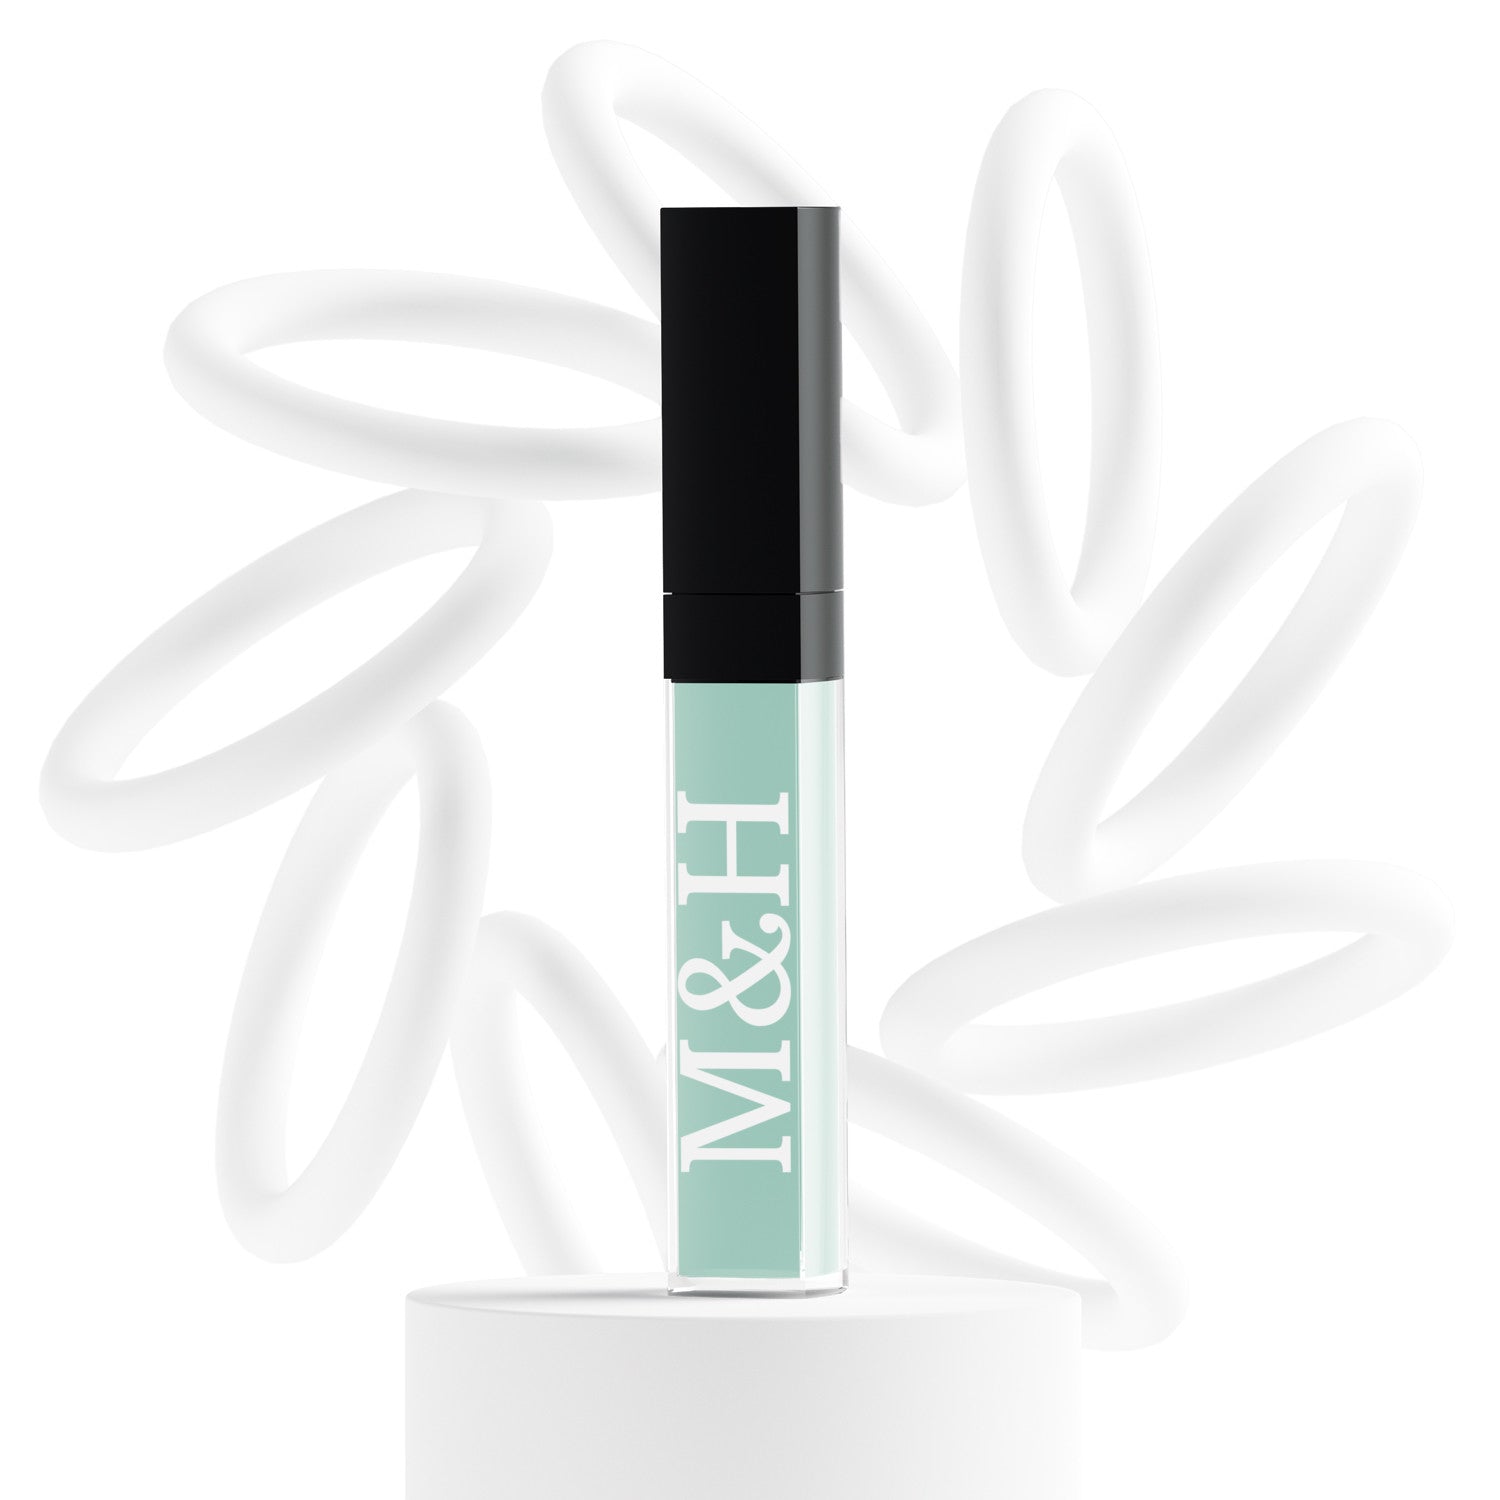 Vegan Concealers - M&H FashionVegan ConcealersconcealerM&H FashionM&H FashionConcealer-942Mint CorrectorVegan ConcealersM&H FashionconcealerM&H Fashion This multifunctional concealer is designed to cover under-eye circles, complexion alterations, and major imperfections like scars, hyperpigmentation, burns, and tatVegan Concealers